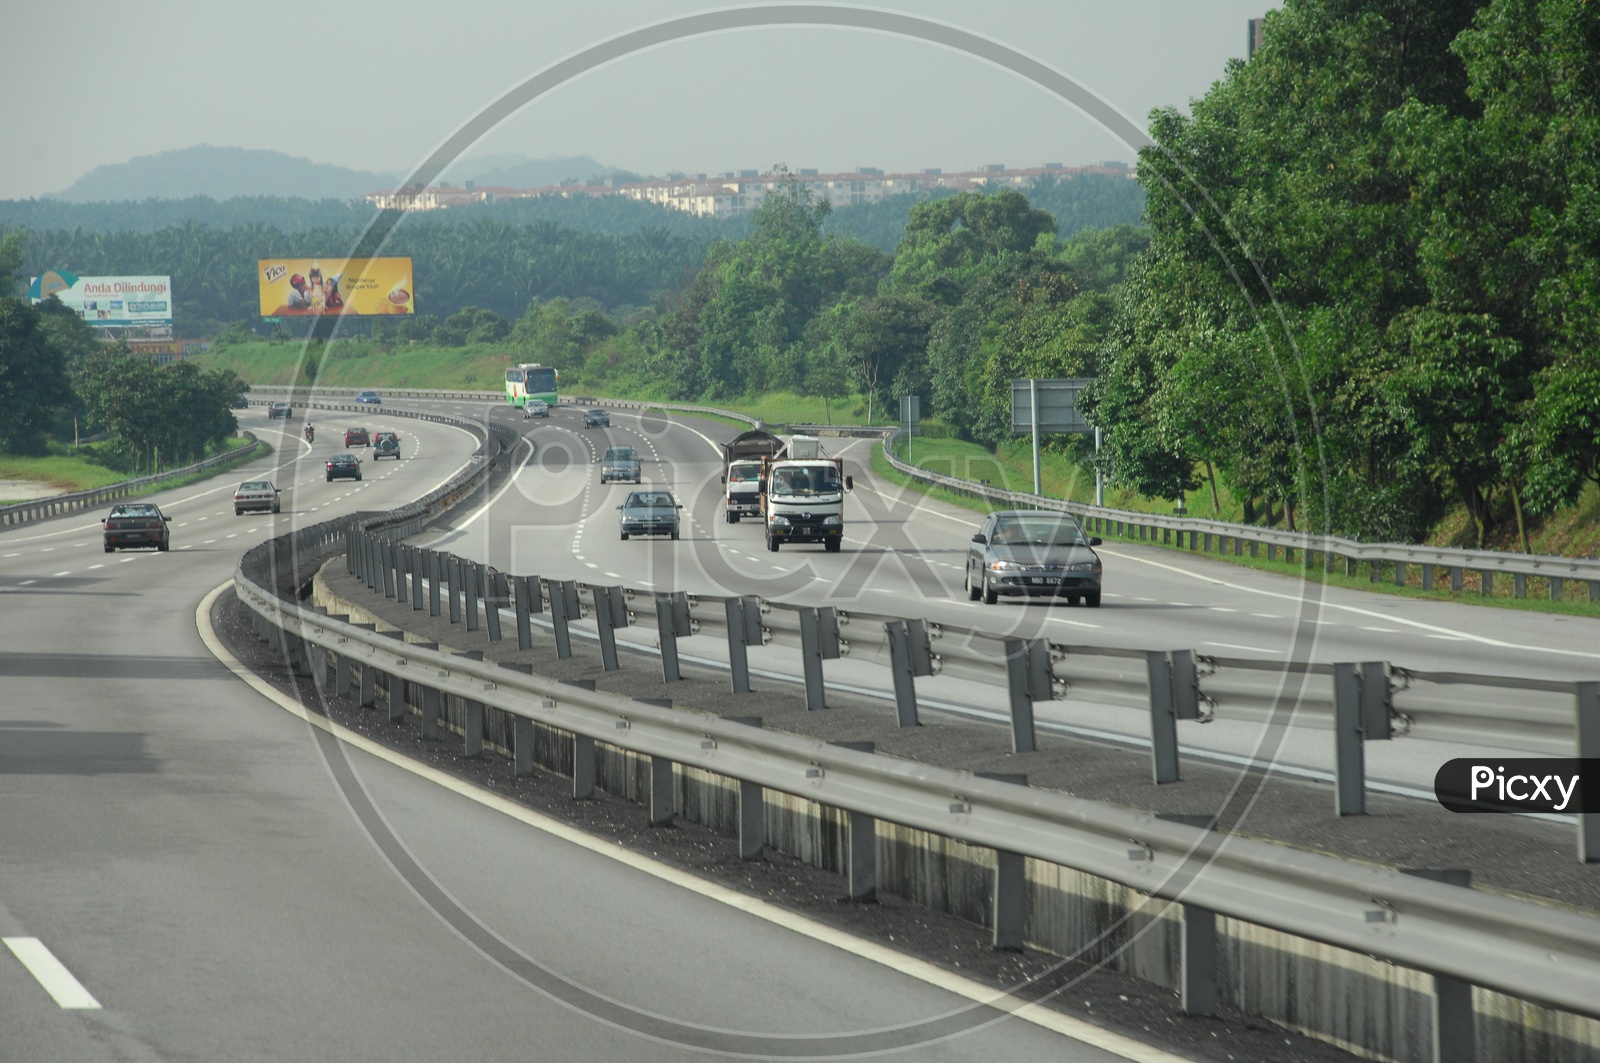 vehicles moving on controlled access highway